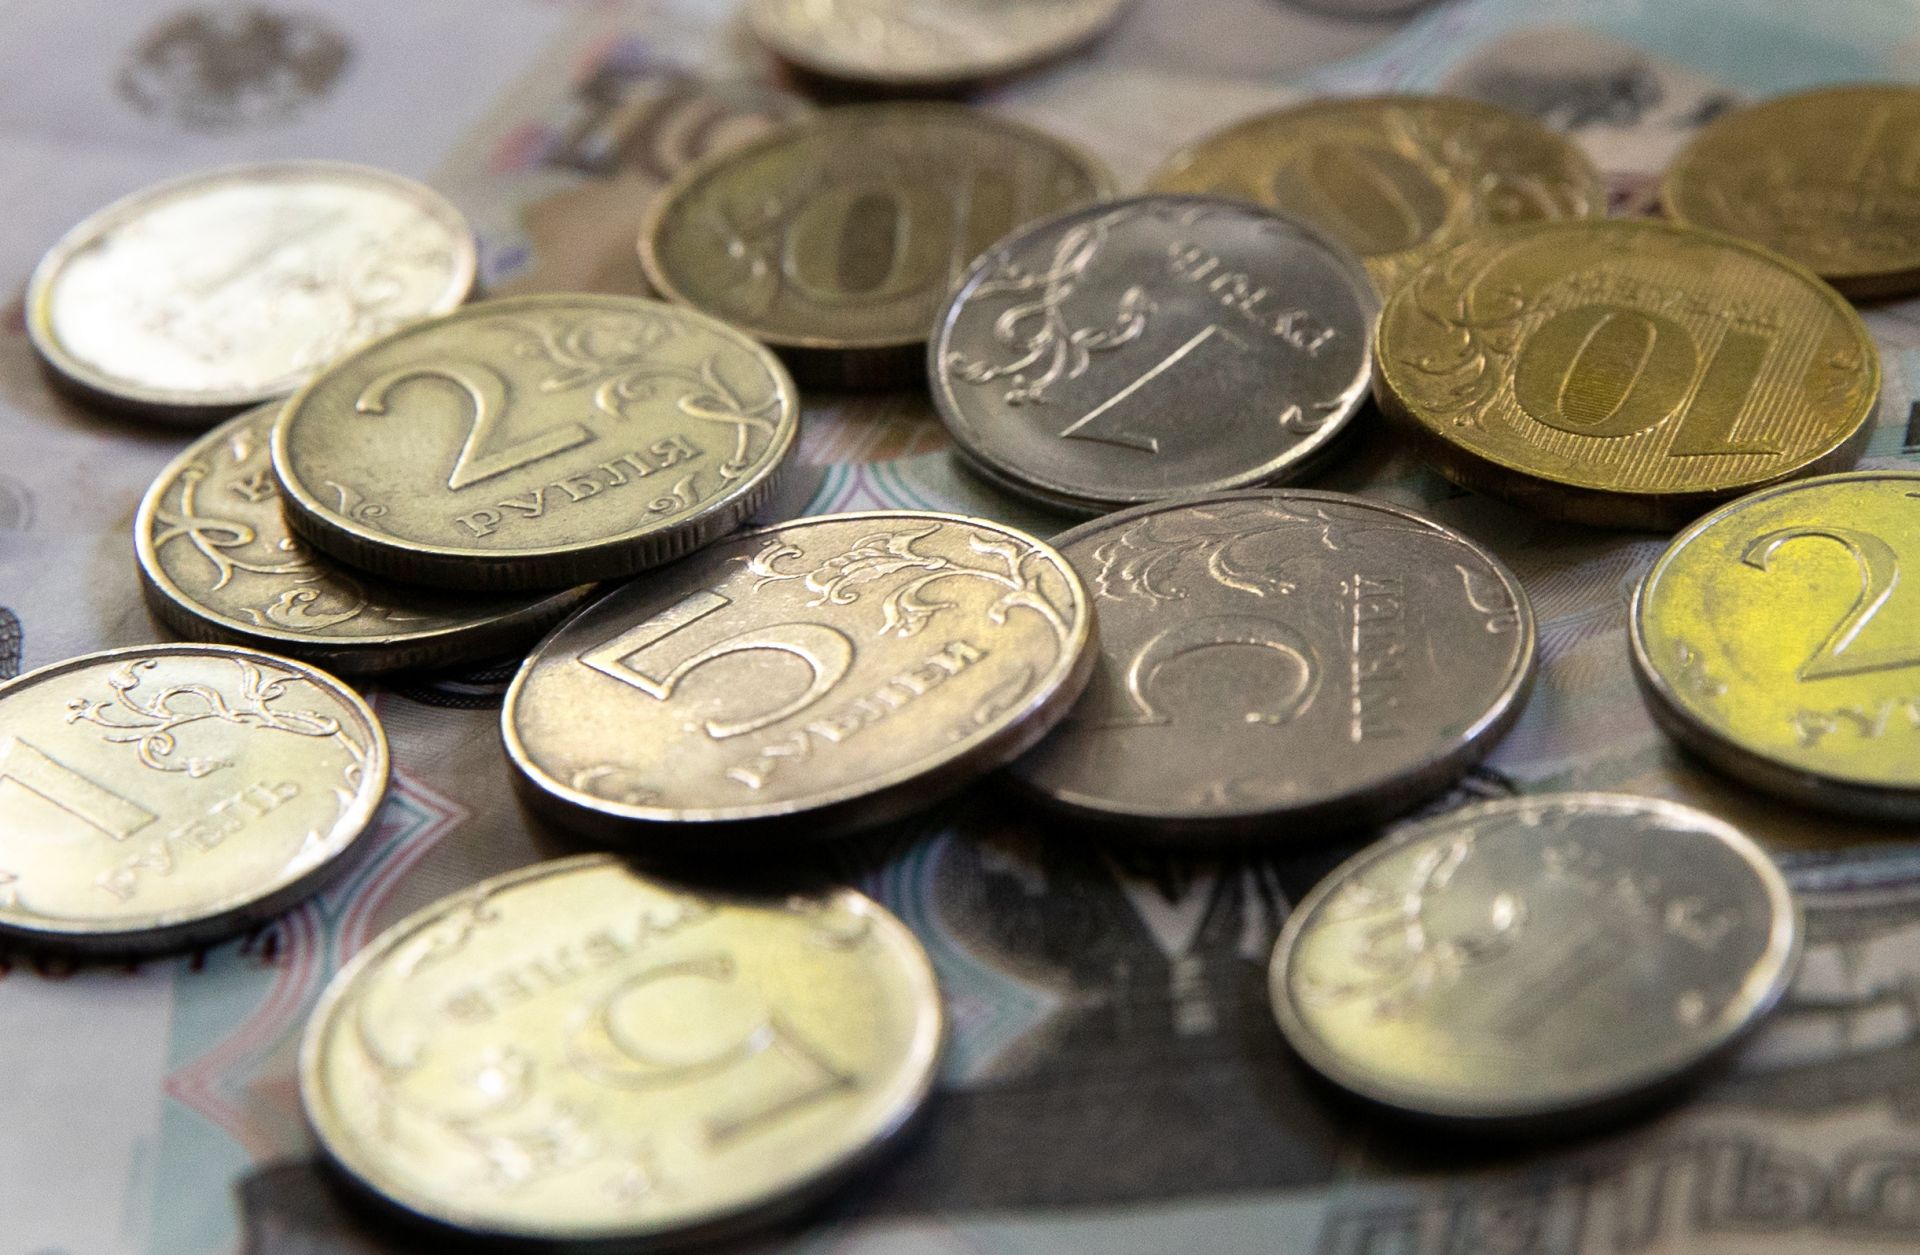 Russian ruble coins are seen in this photo illustration.